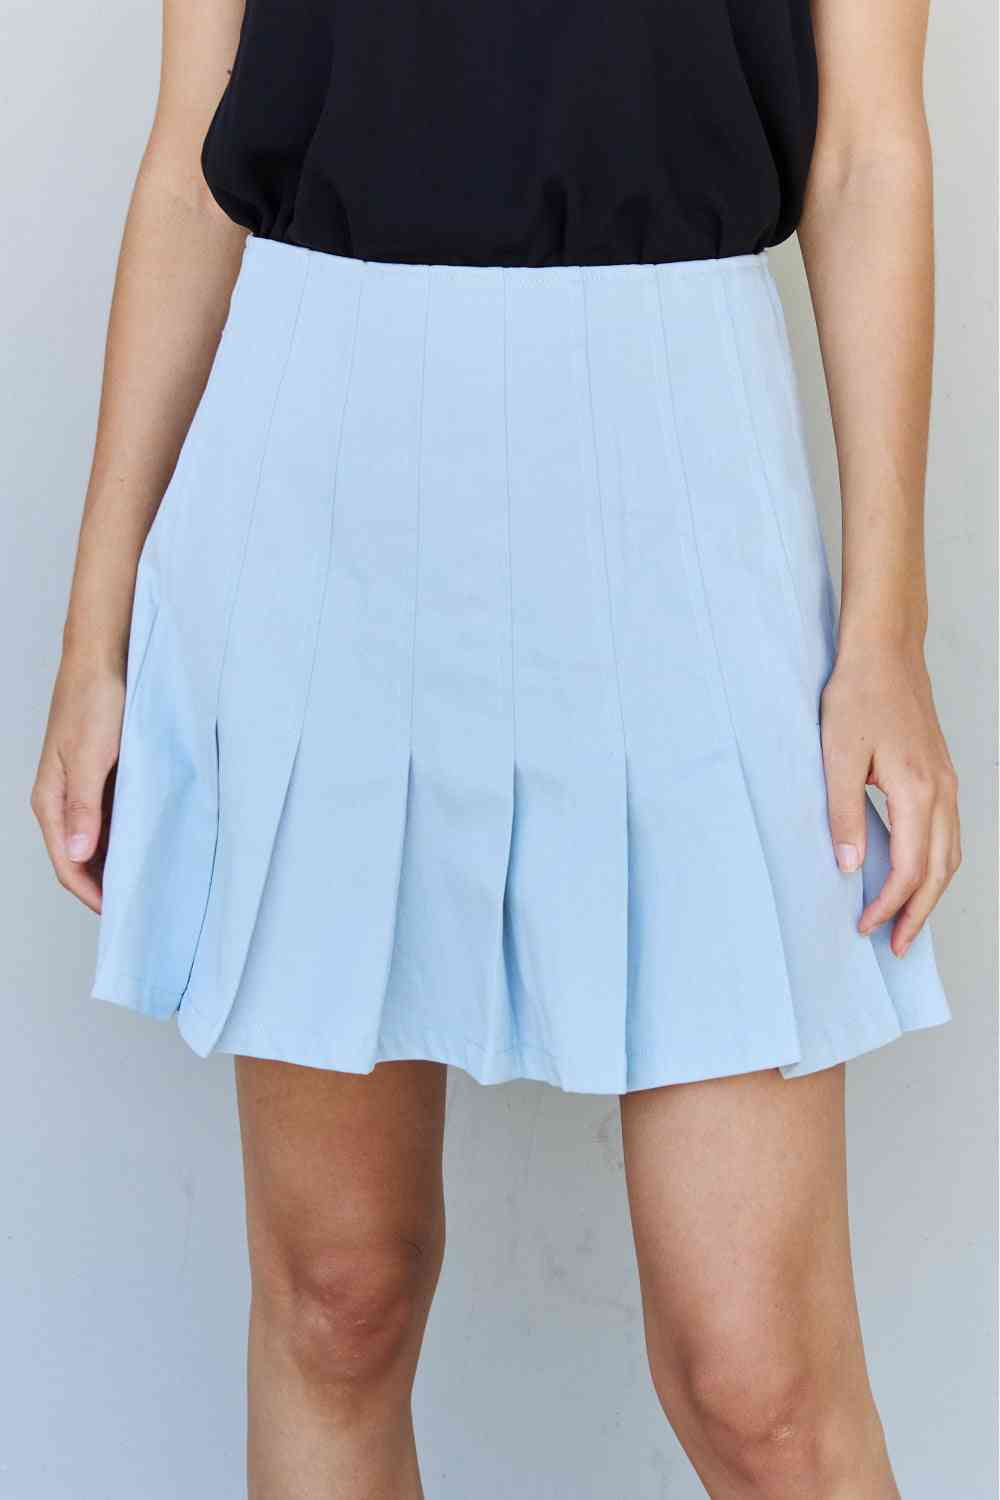 Only Mine Pleated Mini Tennis Skirt in Faded Blue